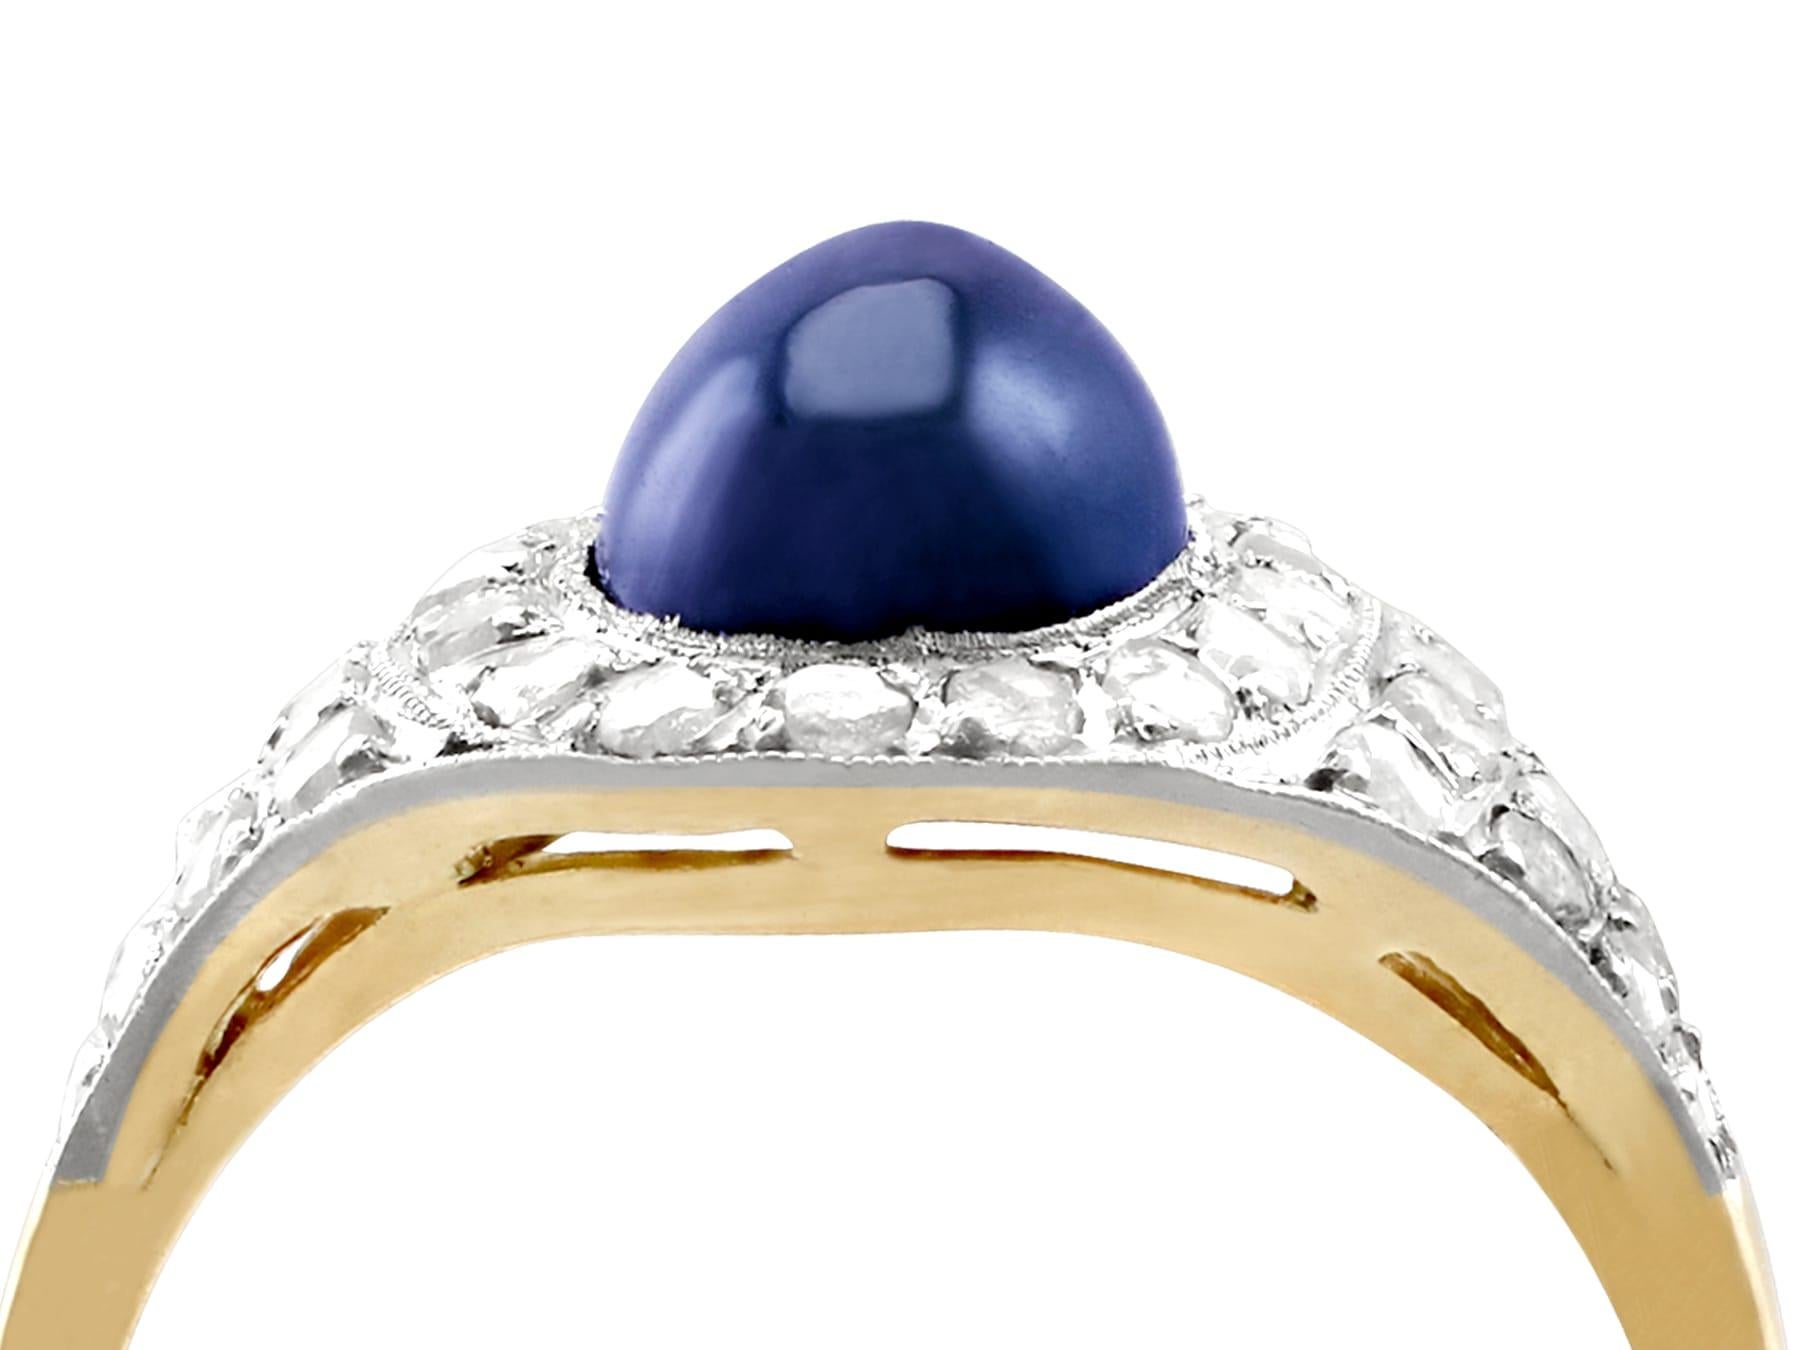 A fine and impressive antique 2.62 carat blue sapphire and 0.48 carat diamond, 18 karat yellow gold and 18 karat white gold set dress ring; part of our diverse antique estate jewelry collections.

This fine and impressive cabochon cut sapphire and